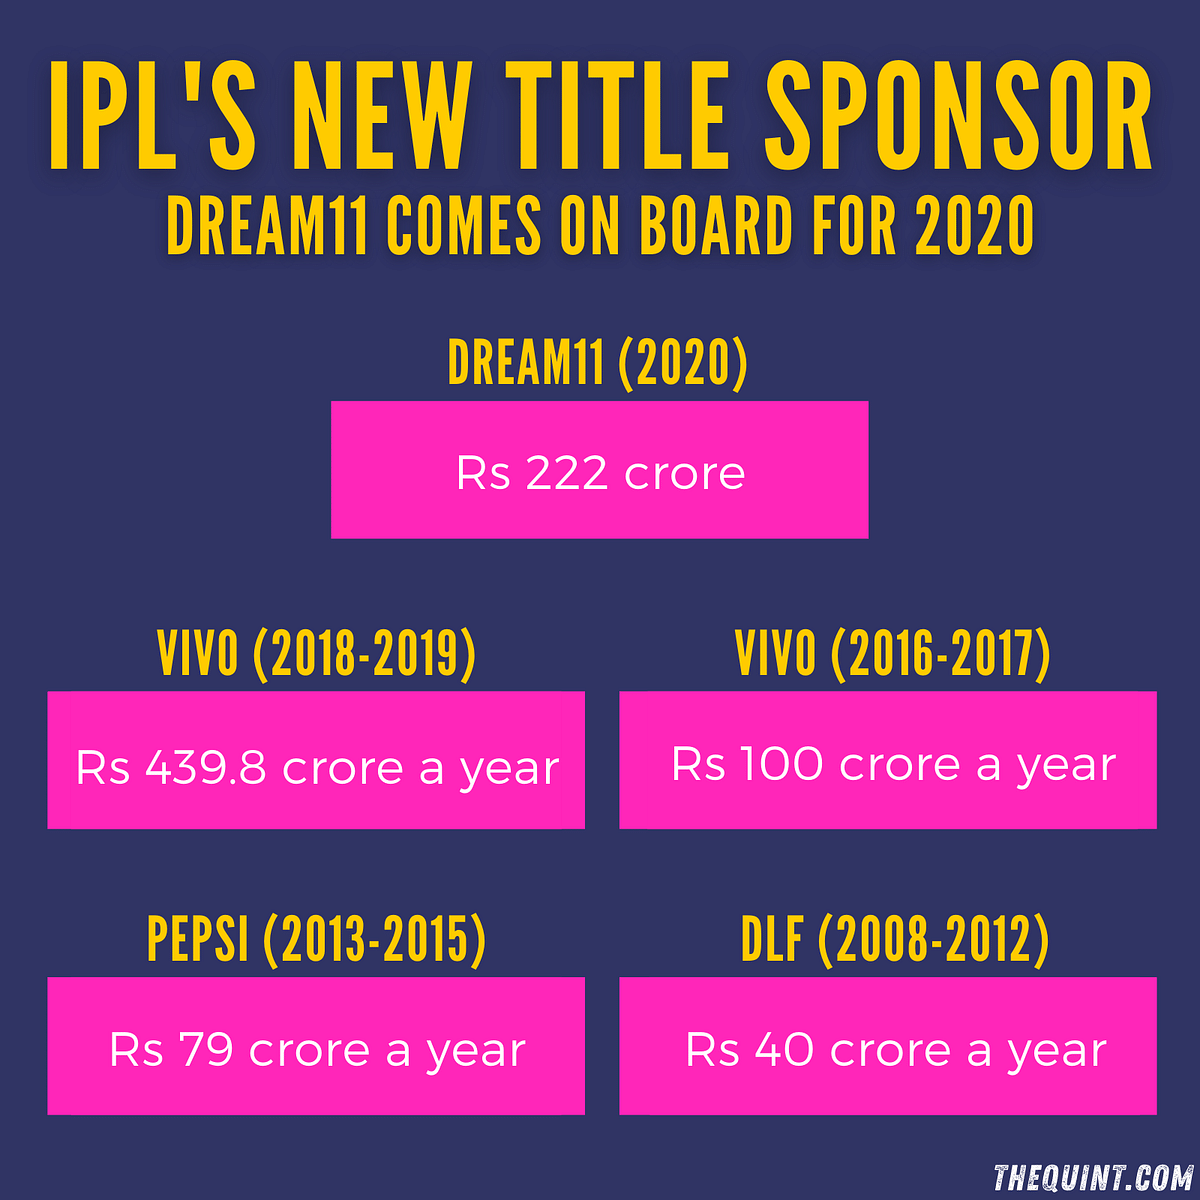 Fantasy cricket app Dream11 has bagged IPL’s title sponsorship deal for Rs 222 crore, according to IPL Chairman.